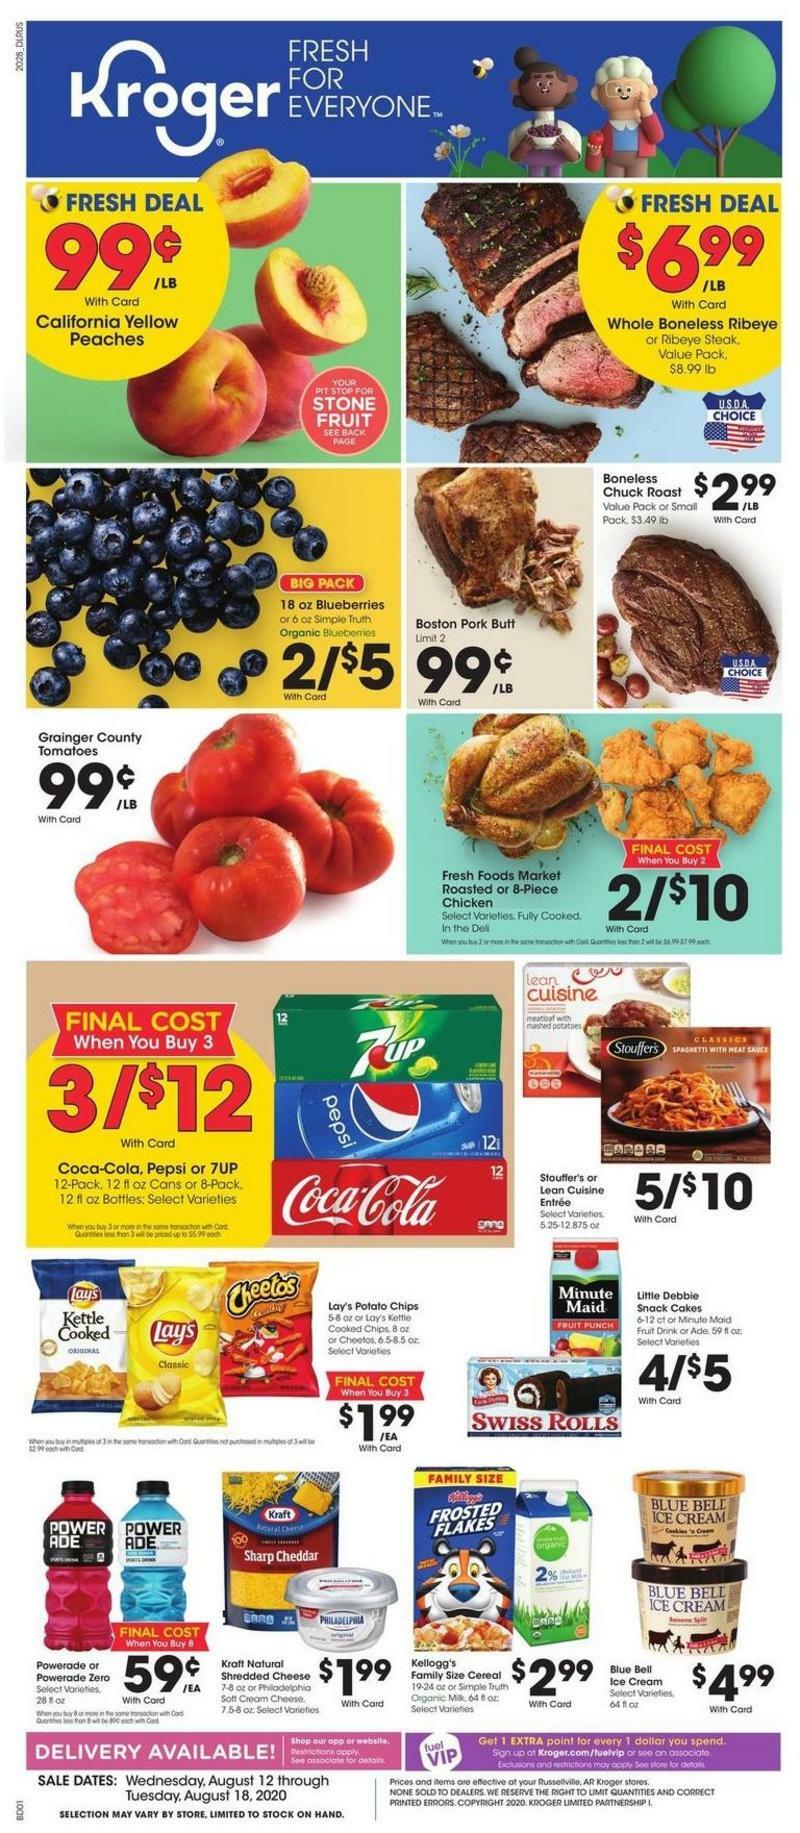 Kroger Weekly Ads & Special Buys from August 12